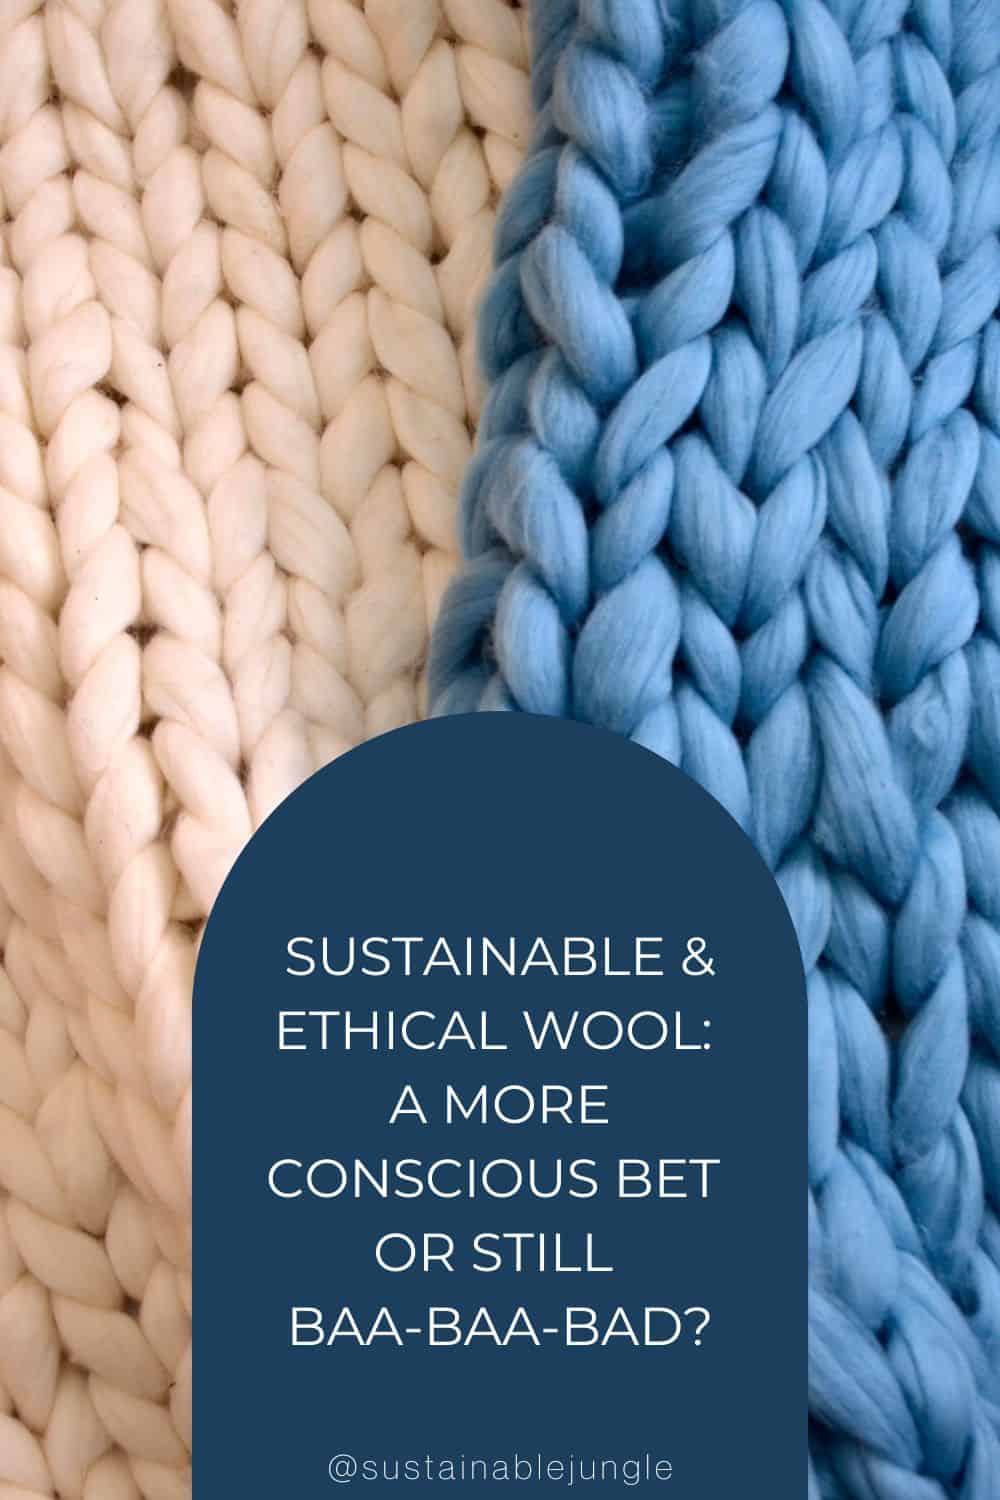 Sustainable & Ethical Wool: A More Conscious Bet Or Still Baa-Baa-Bad? Image by Rusyn Igor's Images #ethicalwool #ethicalmerinowool #iswoolethical #ethicallysourcedwool #crueltyfreewool #ethicalwoolclothing #sustainablejungle